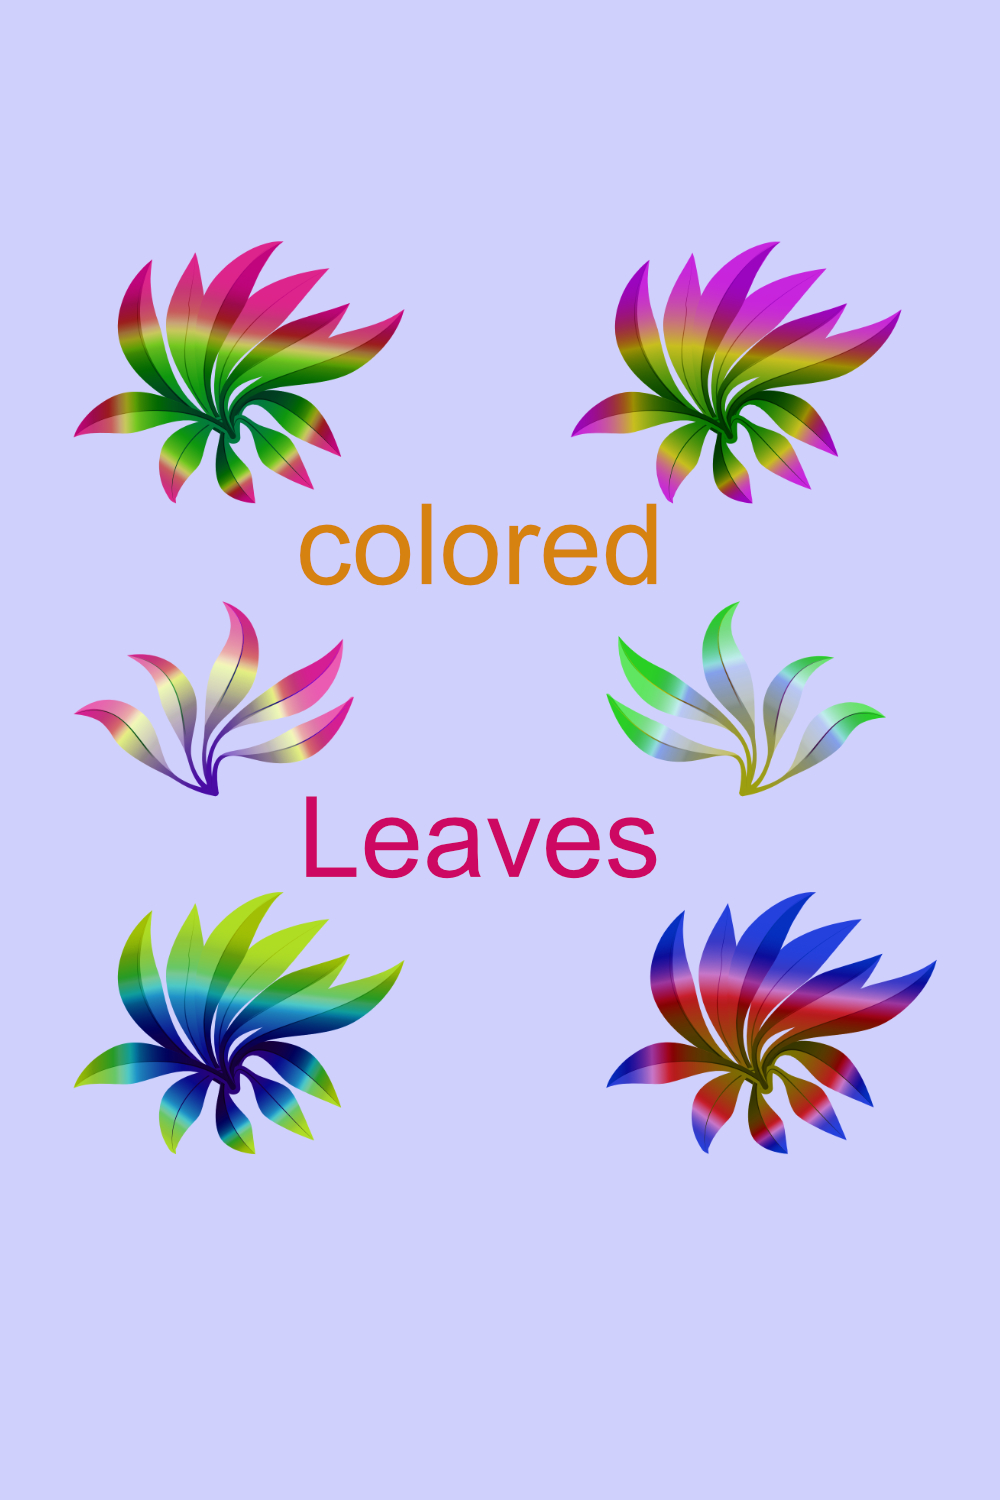 10+ collection of colored leaf images pinterest preview image.